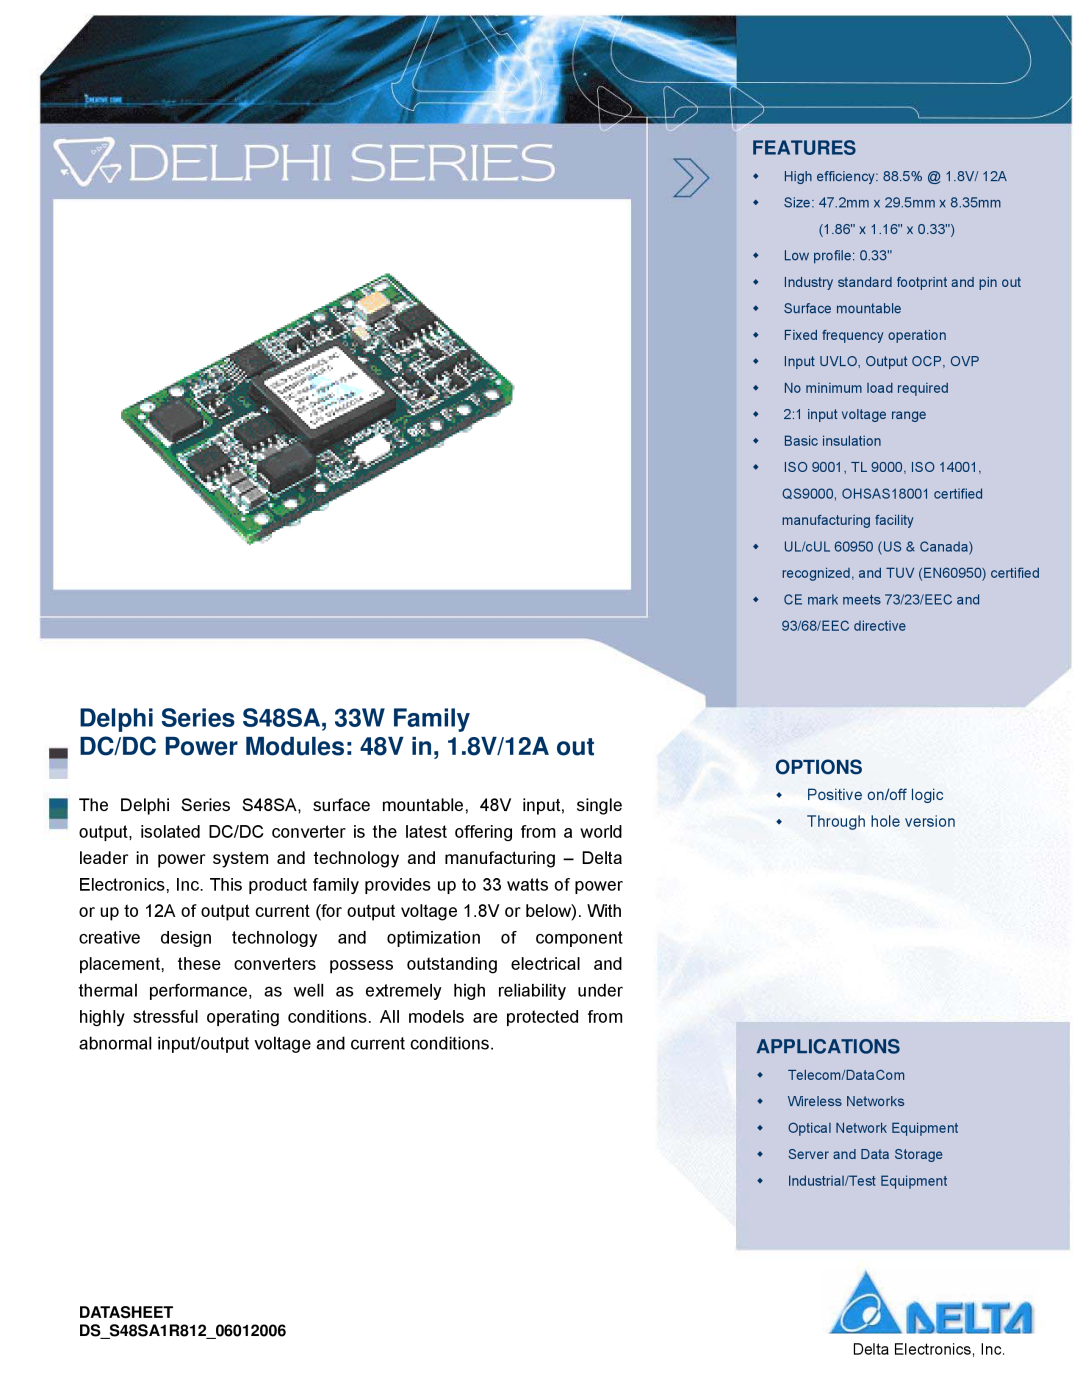 Delta Electronics manual Delphi Series S48SA, 33W Family, DC/DC Power Modules 48V in, 1.8V/12A out, Features, Options 